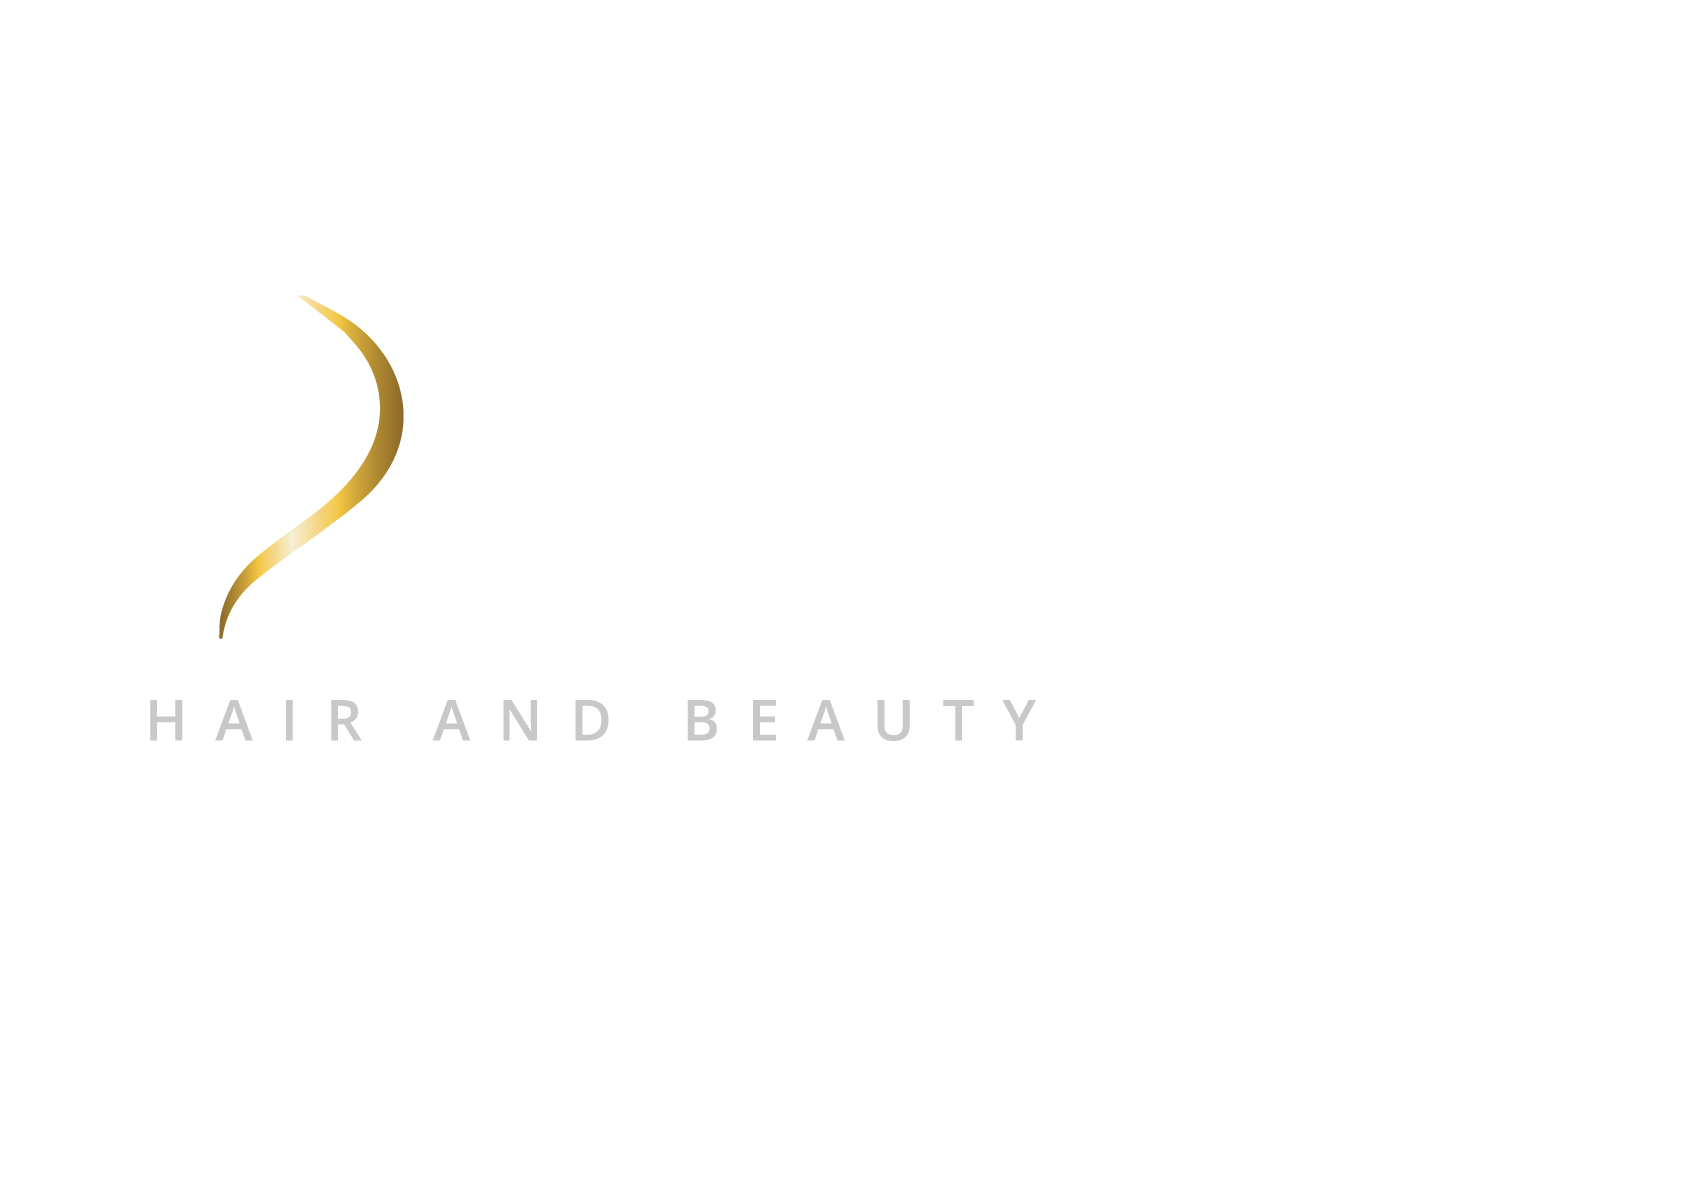 A’LUERE Hair and Beauty by Peter Toth